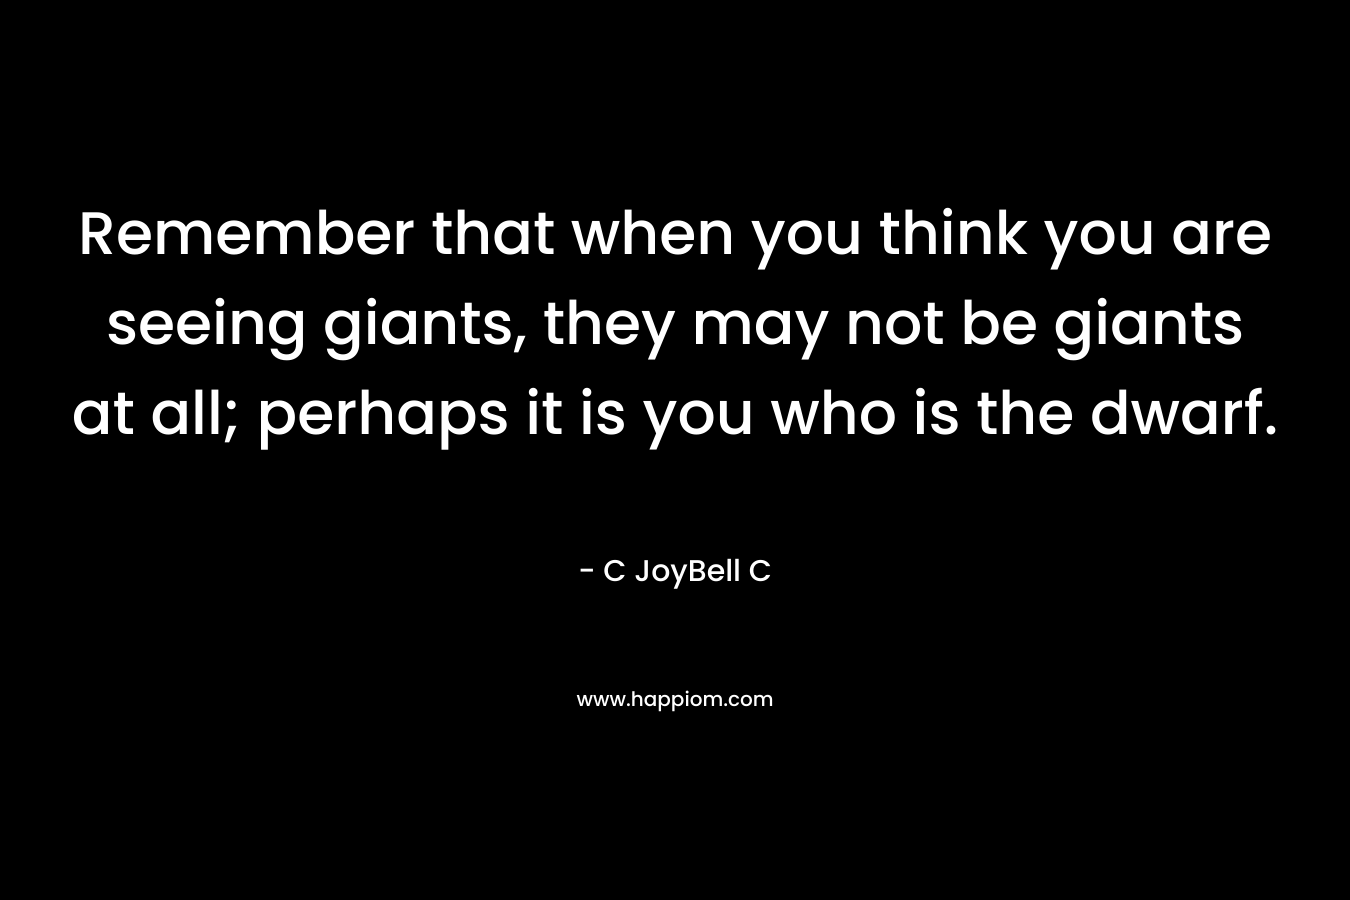 Remember that when you think you are seeing giants, they may not be giants at all; perhaps it is you who is the dwarf.